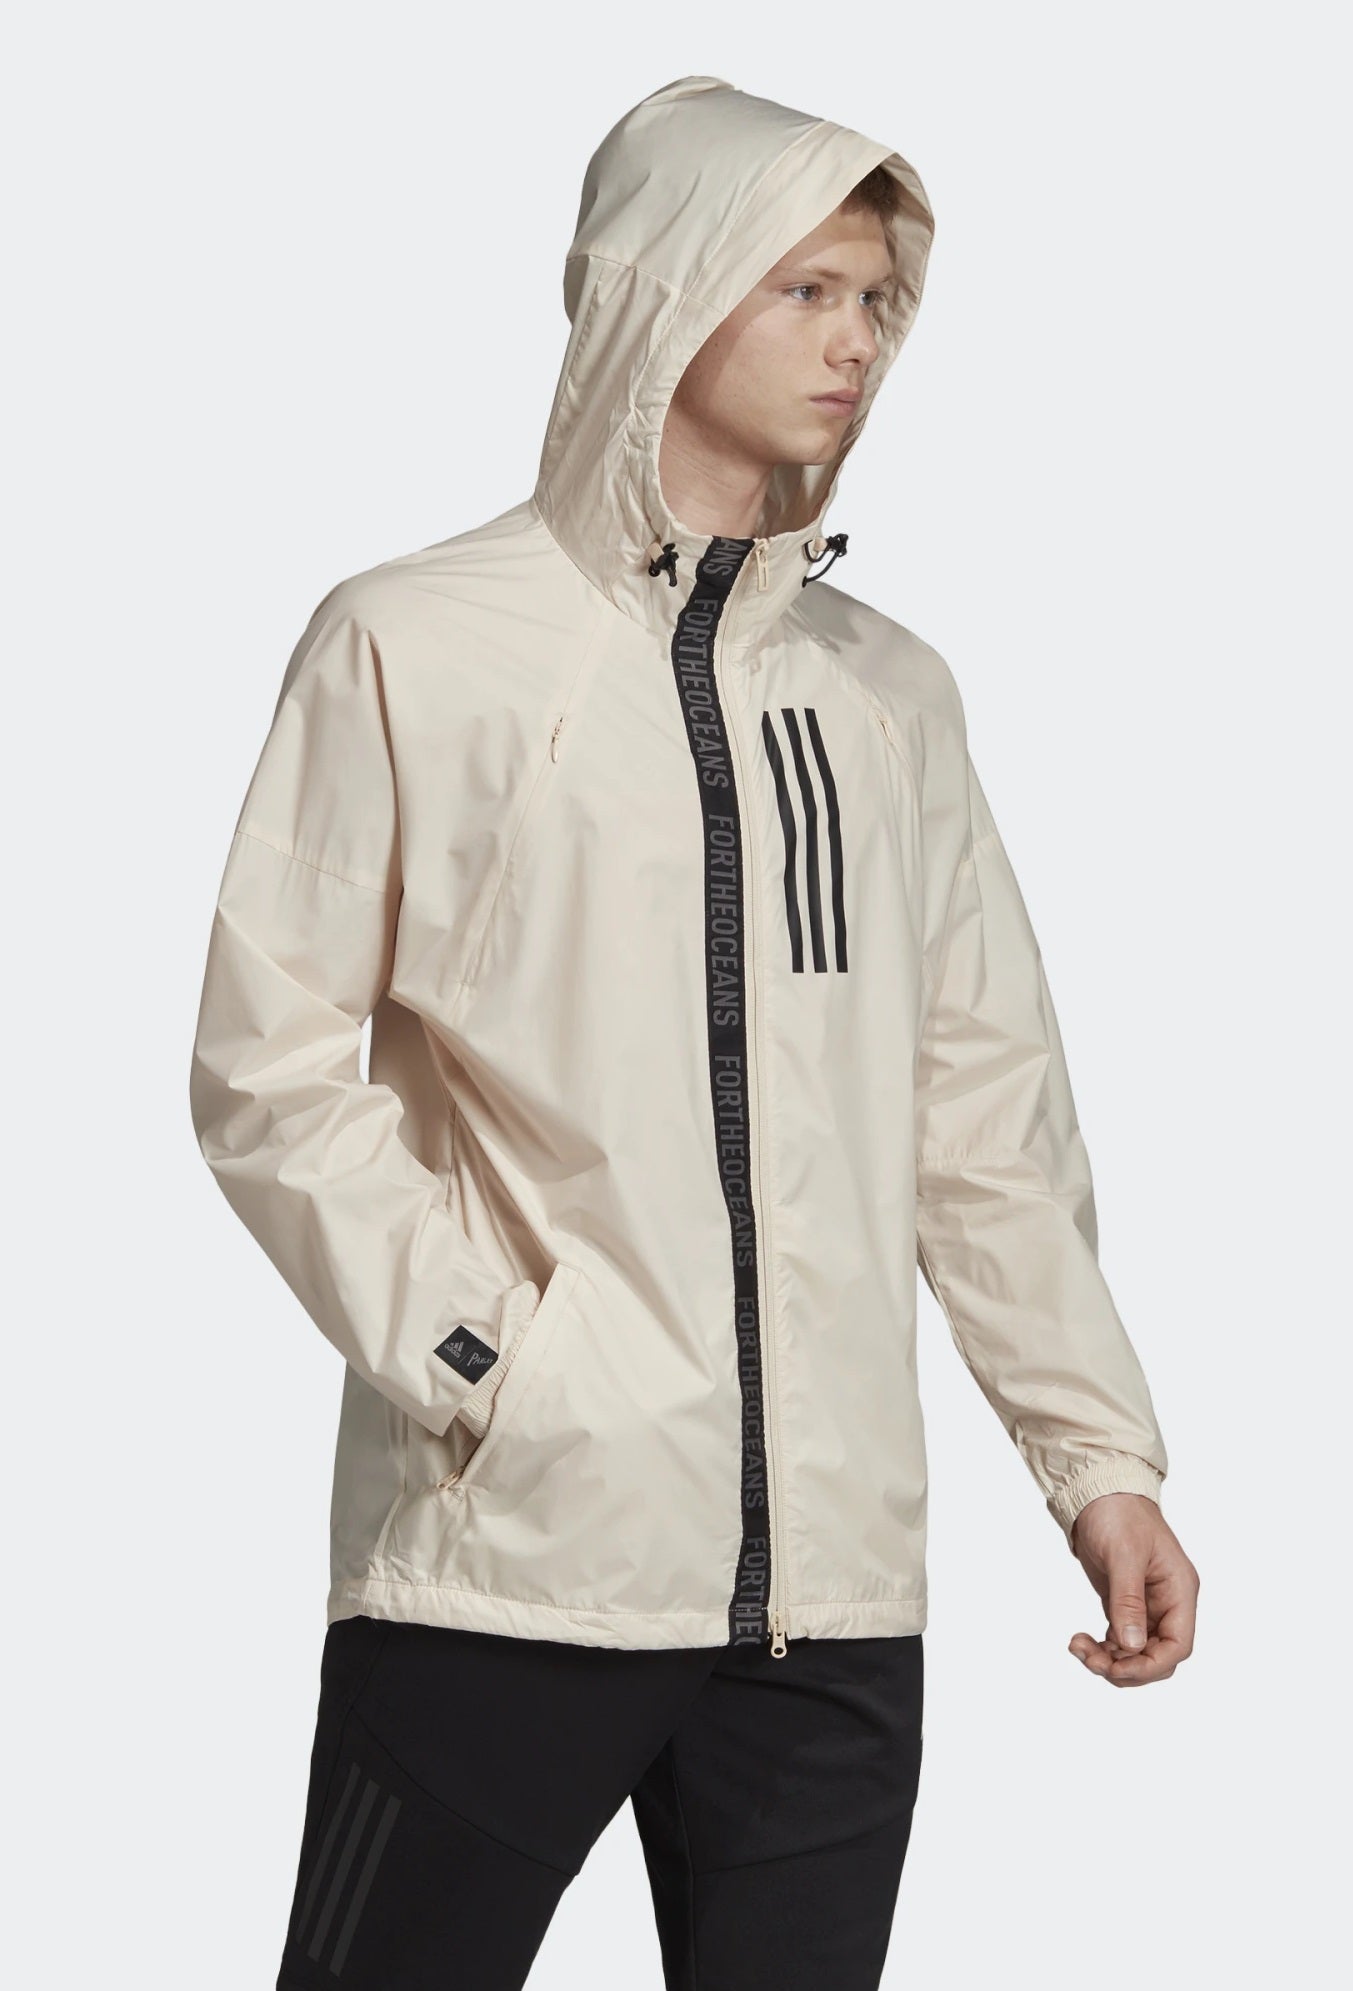 Adidas W.N.D. Parley Jacket – Outlet